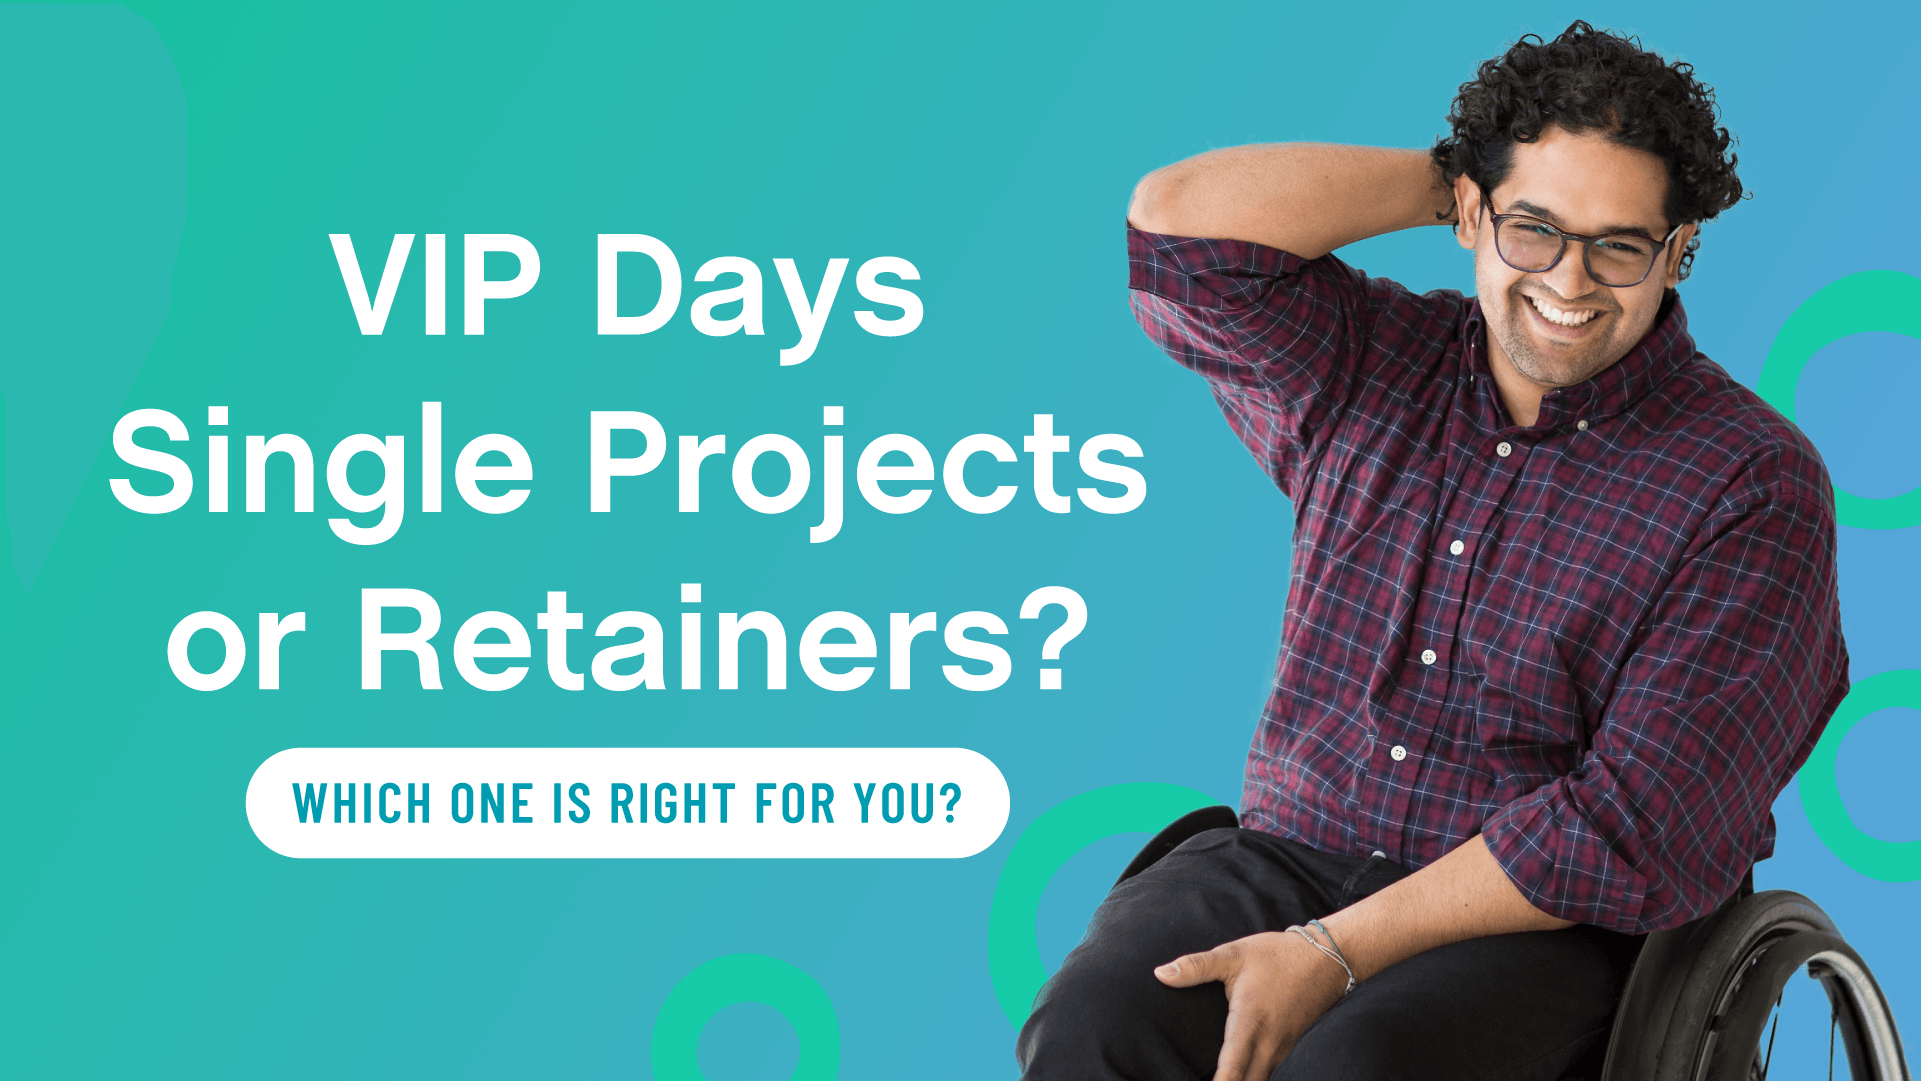 VIP Days, Single Projects, or Retainers: Which One is Right for You?